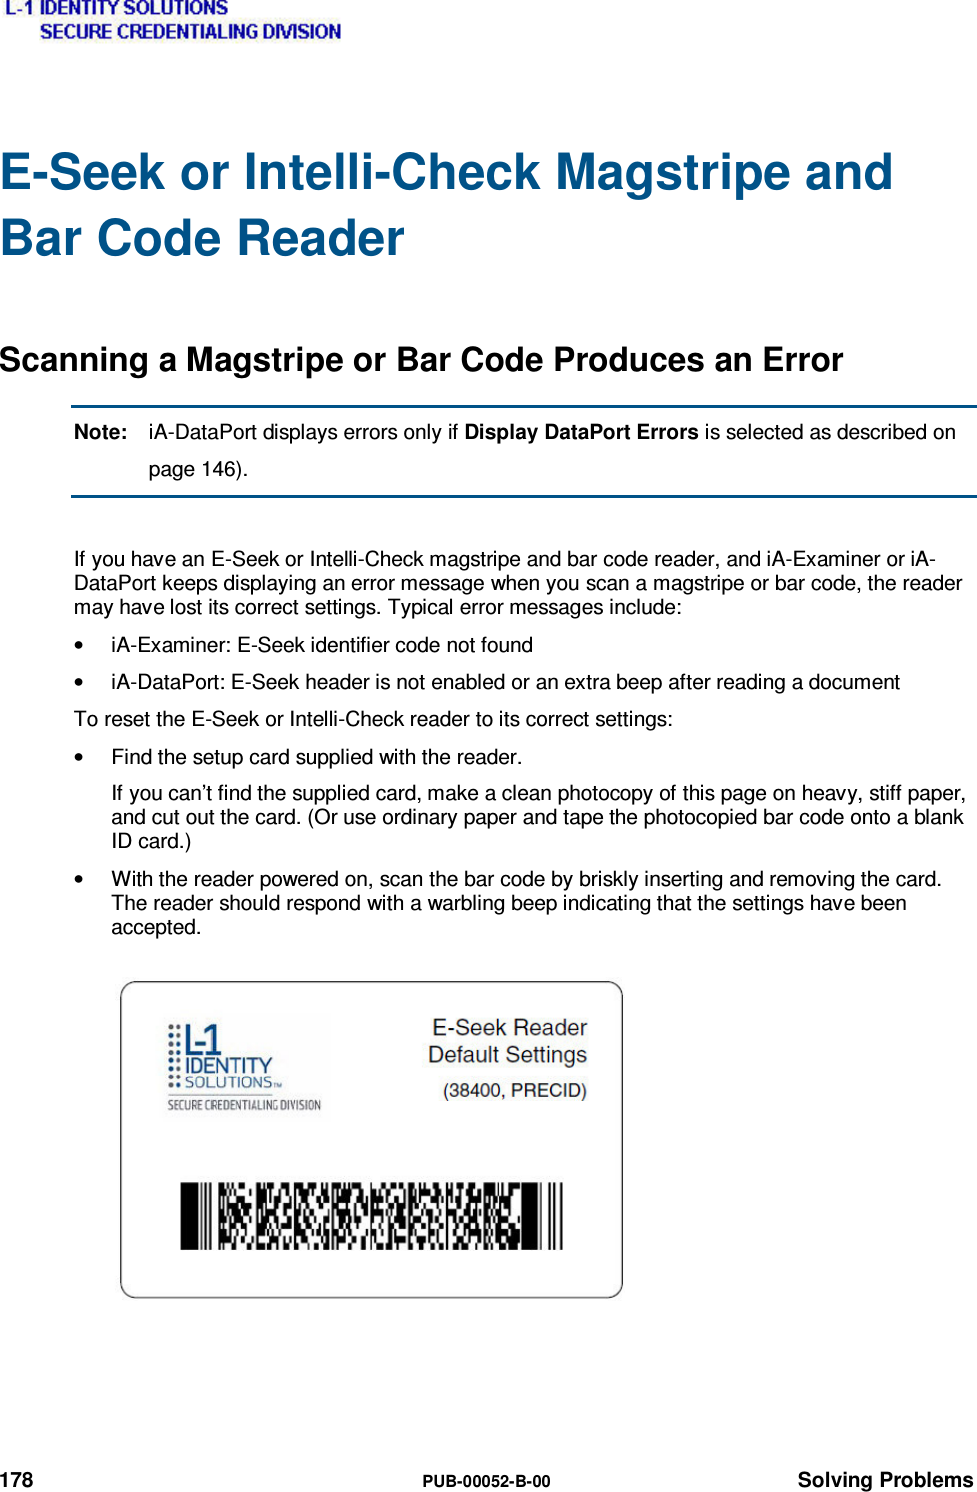  178  PUB-00052-B-00 Solving Problems E-Seek or Intelli-Check Magstripe and Bar Code Reader Scanning a Magstripe or Bar Code Produces an Error Note:  iA-DataPort displays errors only if Display DataPort Errors is selected as described on page 146).  If you have an E-Seek or Intelli-Check magstripe and bar code reader, and iA-Examiner or iA-DataPort keeps displaying an error message when you scan a magstripe or bar code, the reader may have lost its correct settings. Typical error messages include: •  iA-Examiner: E-Seek identifier code not found •  iA-DataPort: E-Seek header is not enabled or an extra beep after reading a document To reset the E-Seek or Intelli-Check reader to its correct settings: •  Find the setup card supplied with the reader. If you can’t find the supplied card, make a clean photocopy of this page on heavy, stiff paper, and cut out the card. (Or use ordinary paper and tape the photocopied bar code onto a blank ID card.) •  With the reader powered on, scan the bar code by briskly inserting and removing the card. The reader should respond with a warbling beep indicating that the settings have been accepted. 